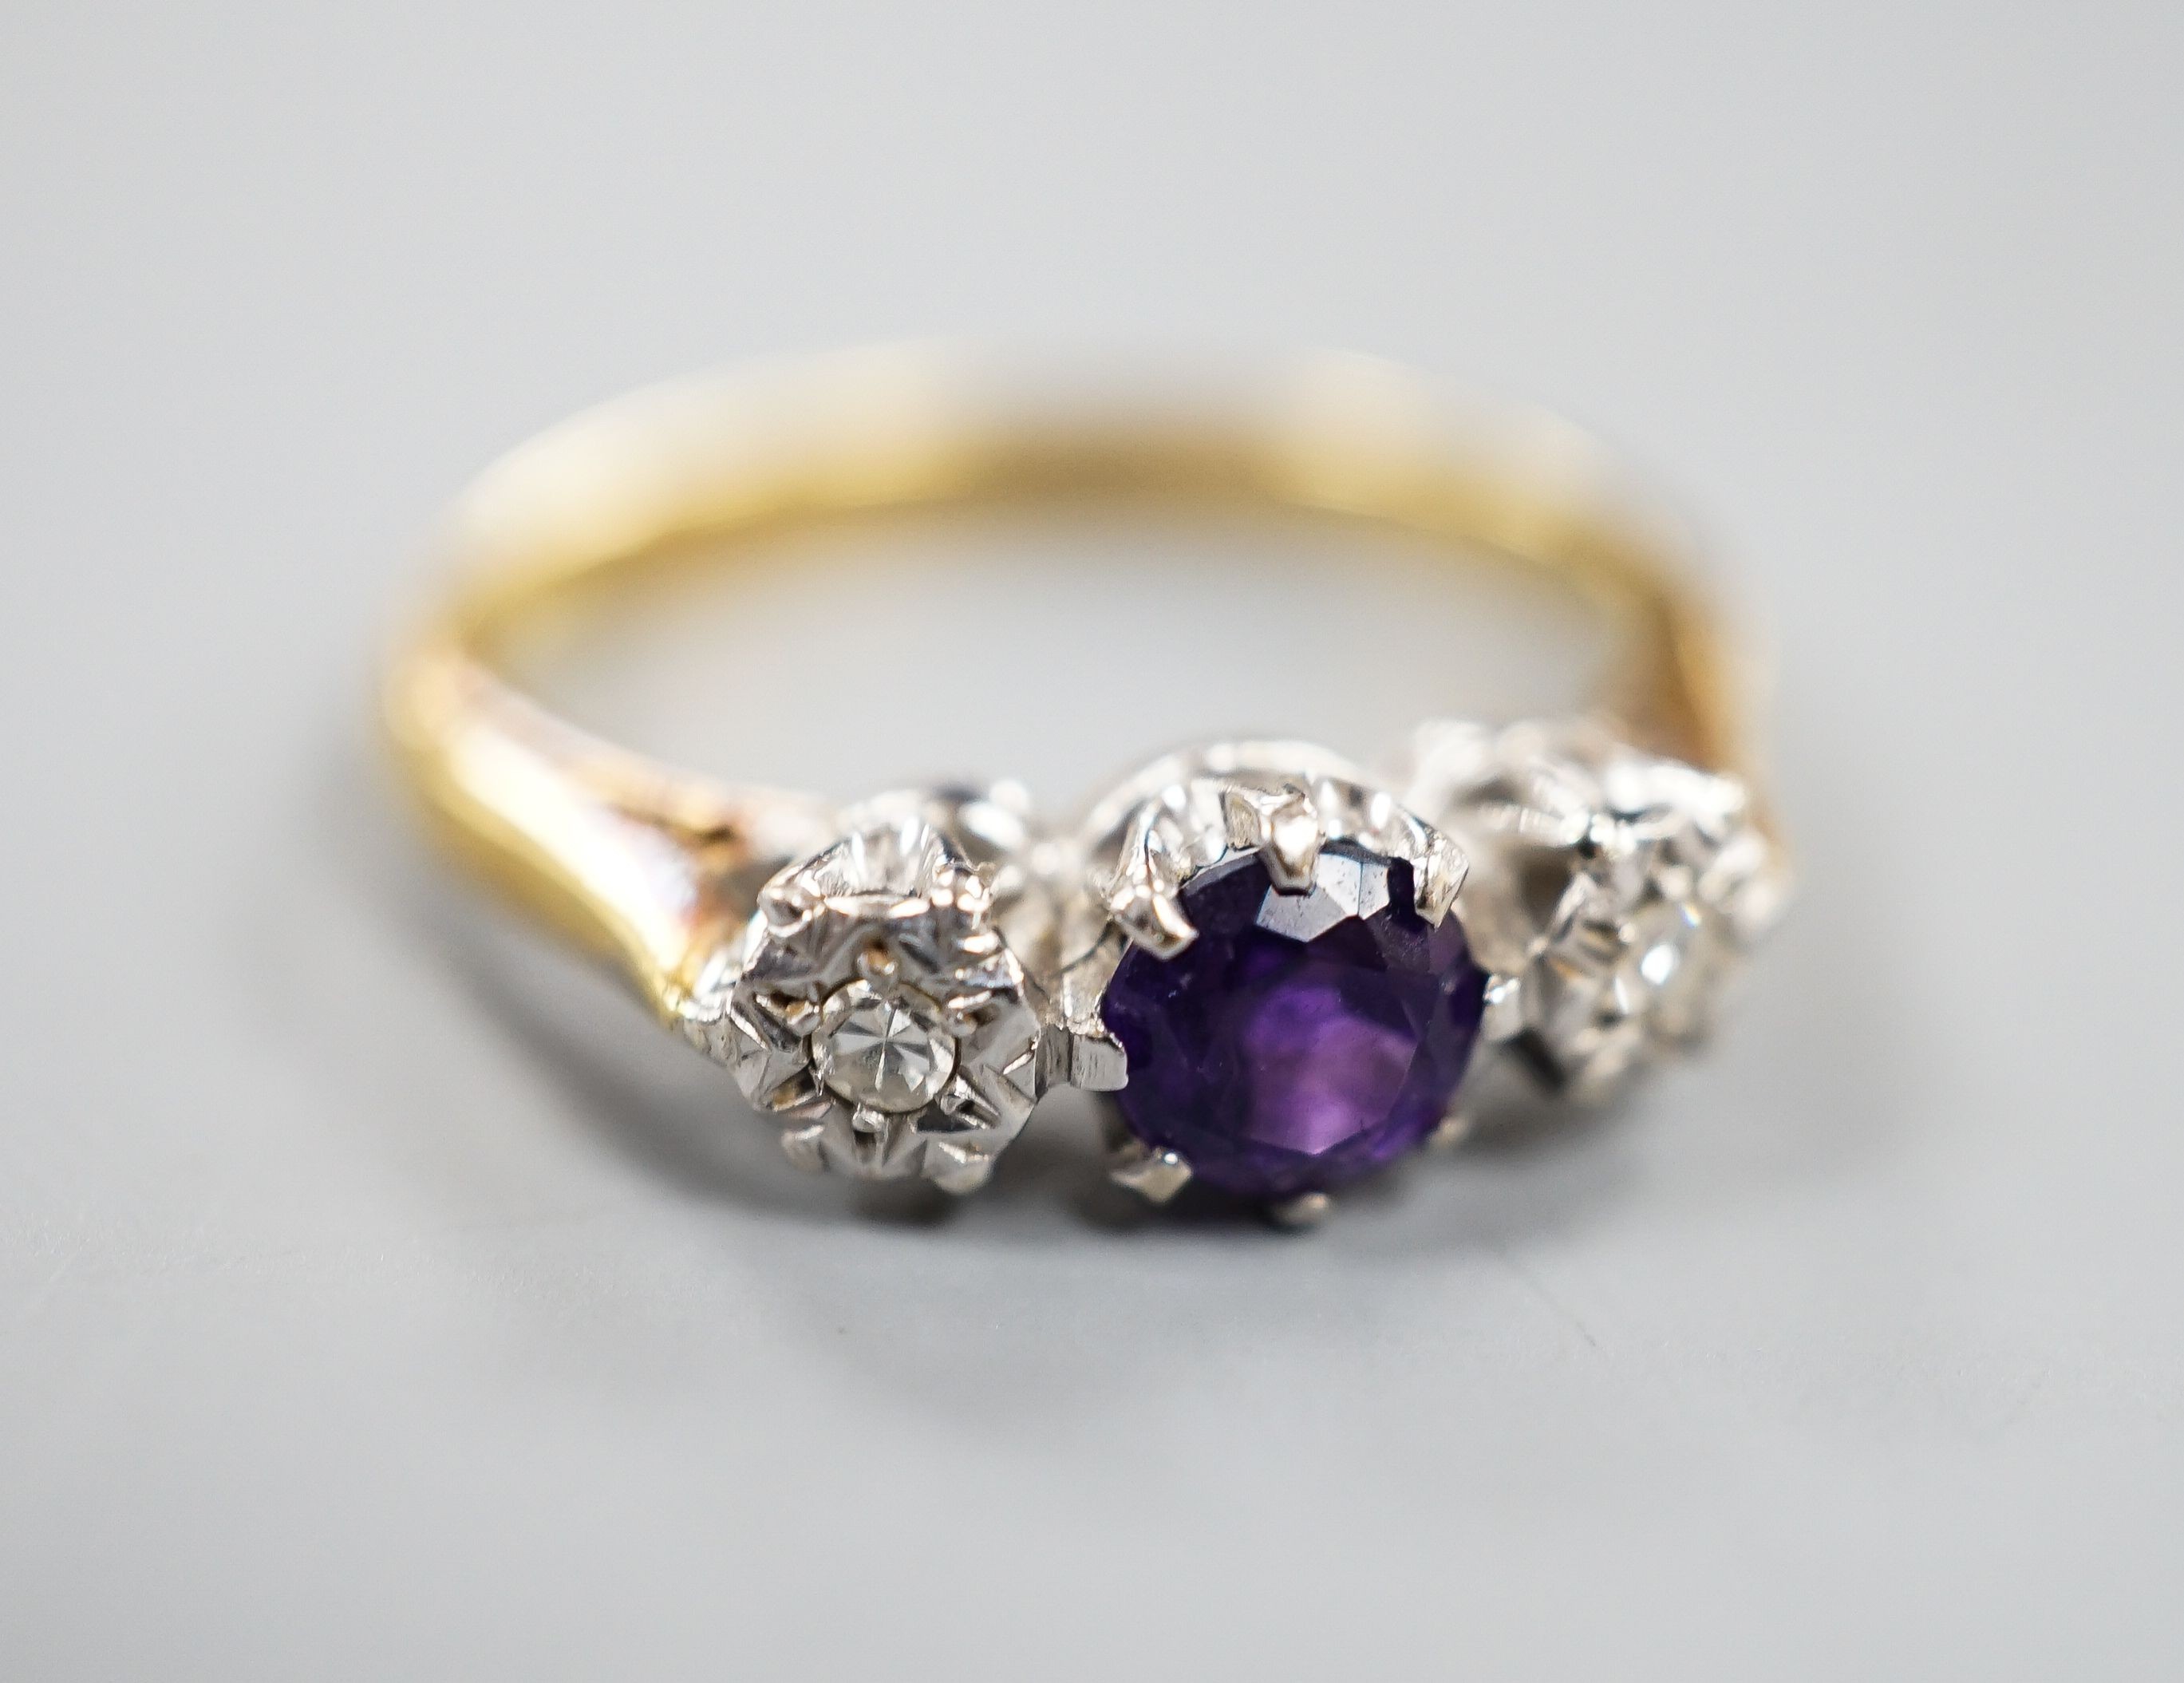 An 18ct, singe stone amethyst and illusion set two stone diamond ring, size, O/P, gross weight 3.7 grams.